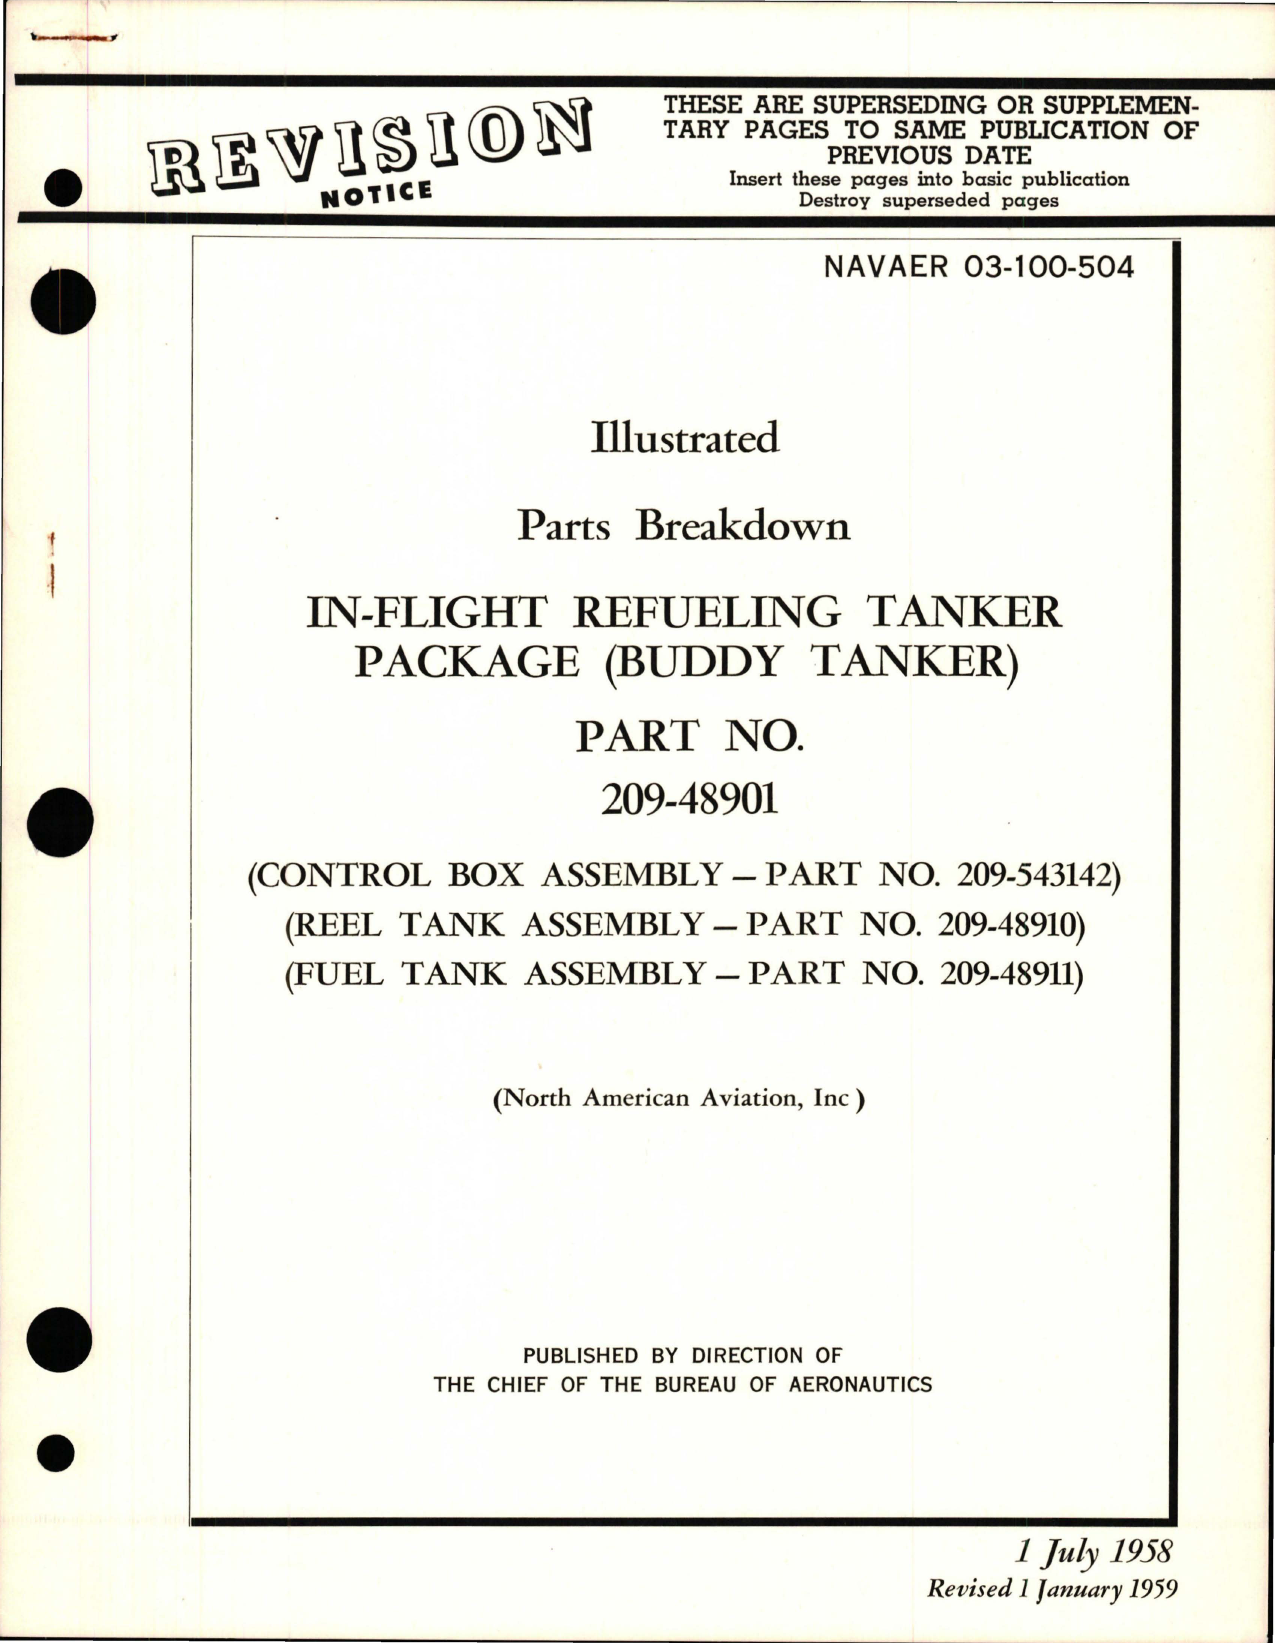 Sample page 1 from AirCorps Library document: Illustrated Parts Breakdown for In-Flight Refueling Tanker Package (Buddy Tanker) - Part 209-48901